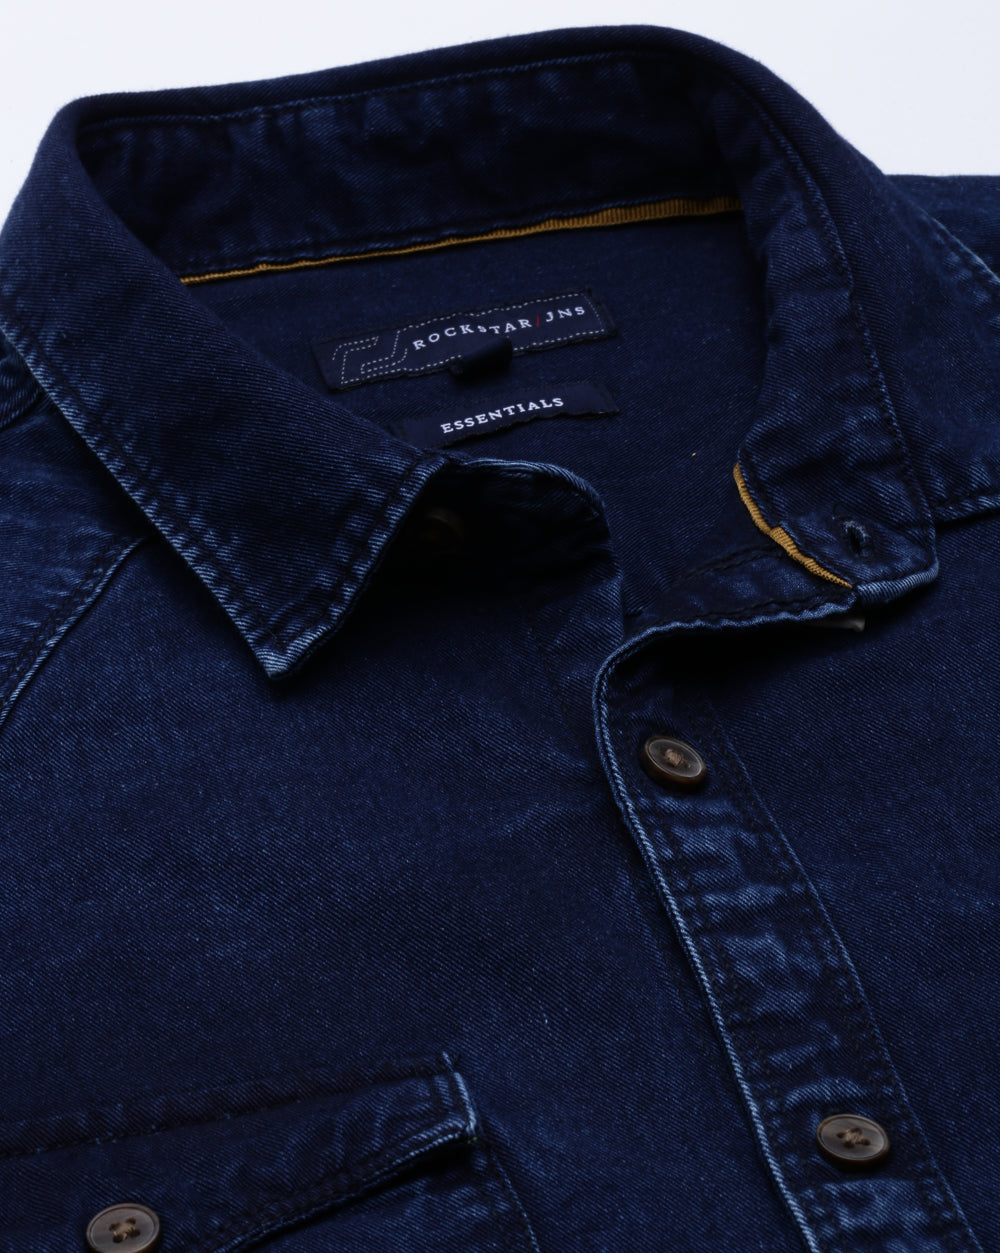 G-STAR* *HEAVY CARGO STUFF* *DOUBLE POCKET* *EMBROIDERY WORK* *BRANDED  BUTTON* *CARGO SHIRTS WITH H | Polo t shirt design, Cargo shirts, Mens shirt  dress